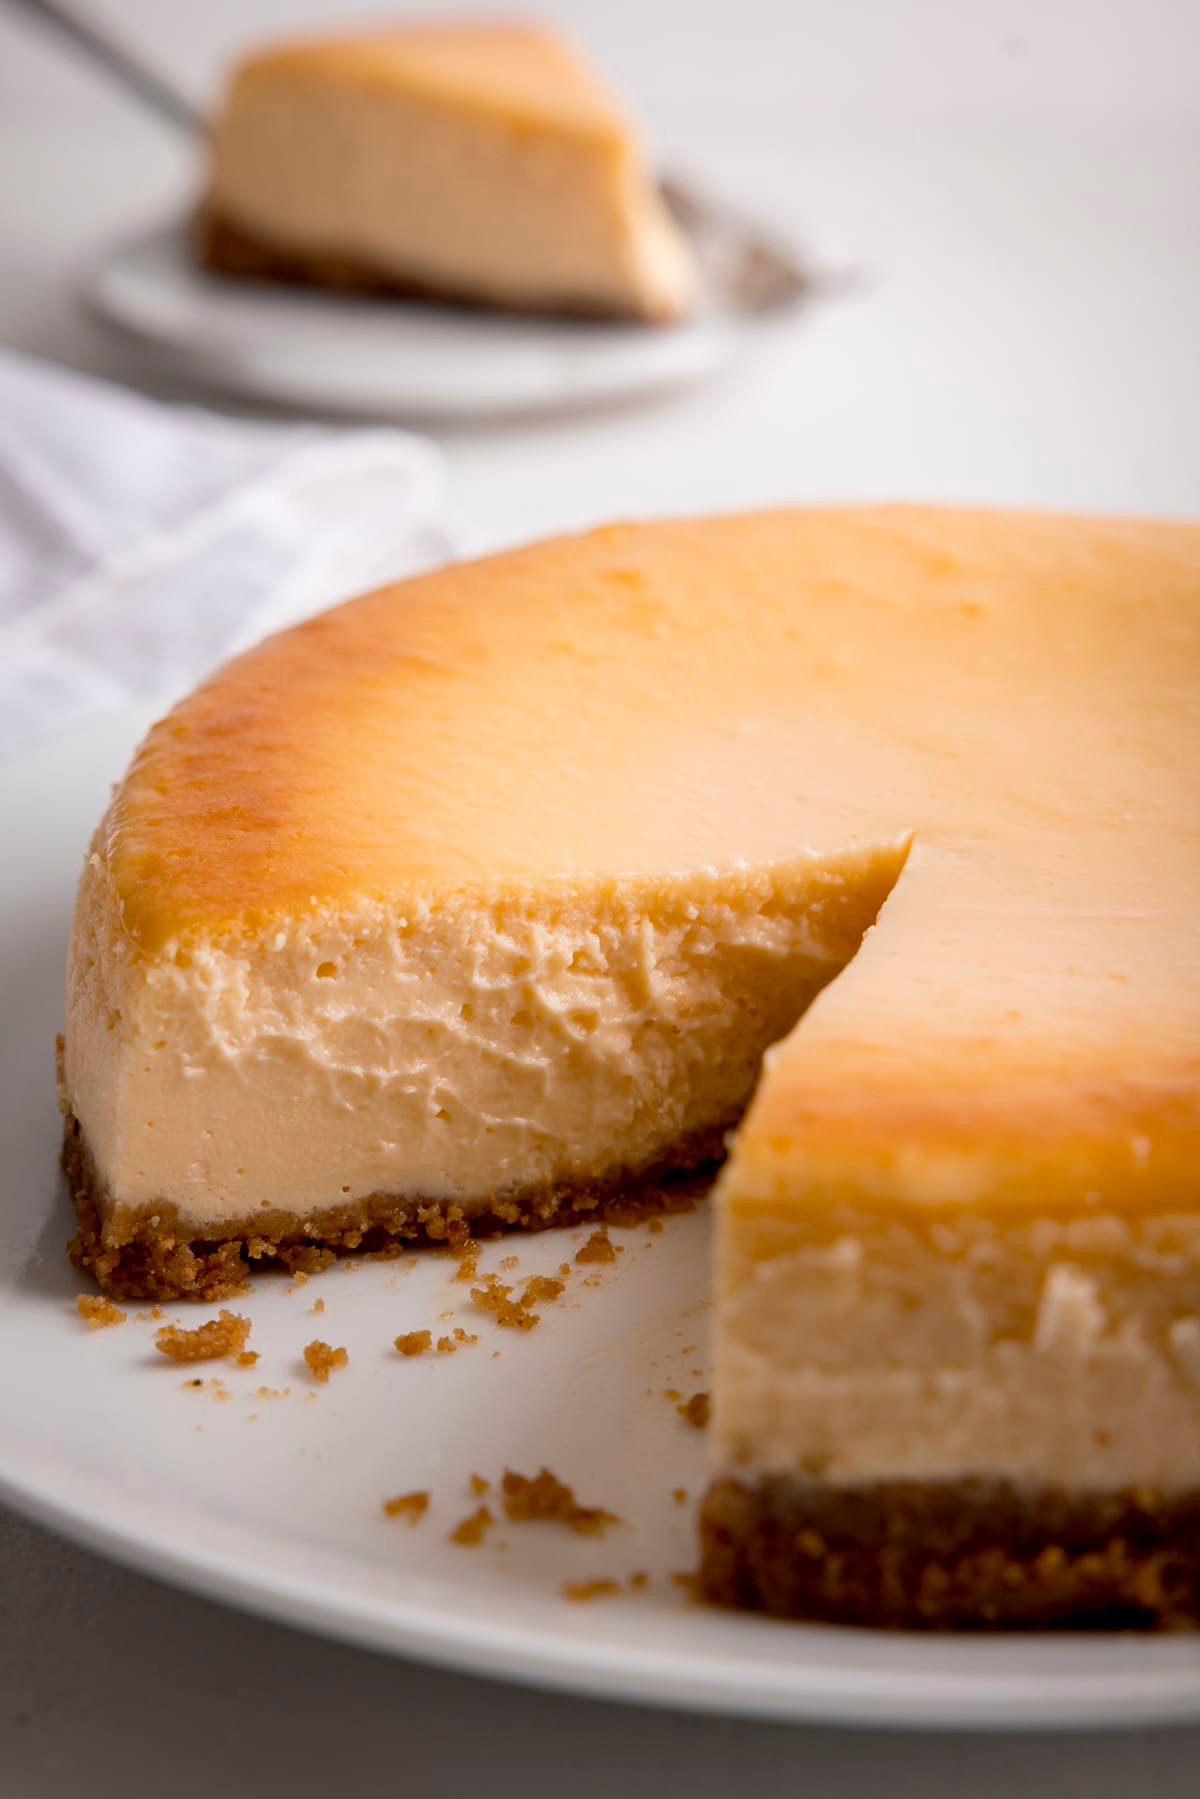 Plain New York cheesecake on a light background with one slice taken out.  The slice lies on a plate in the background.